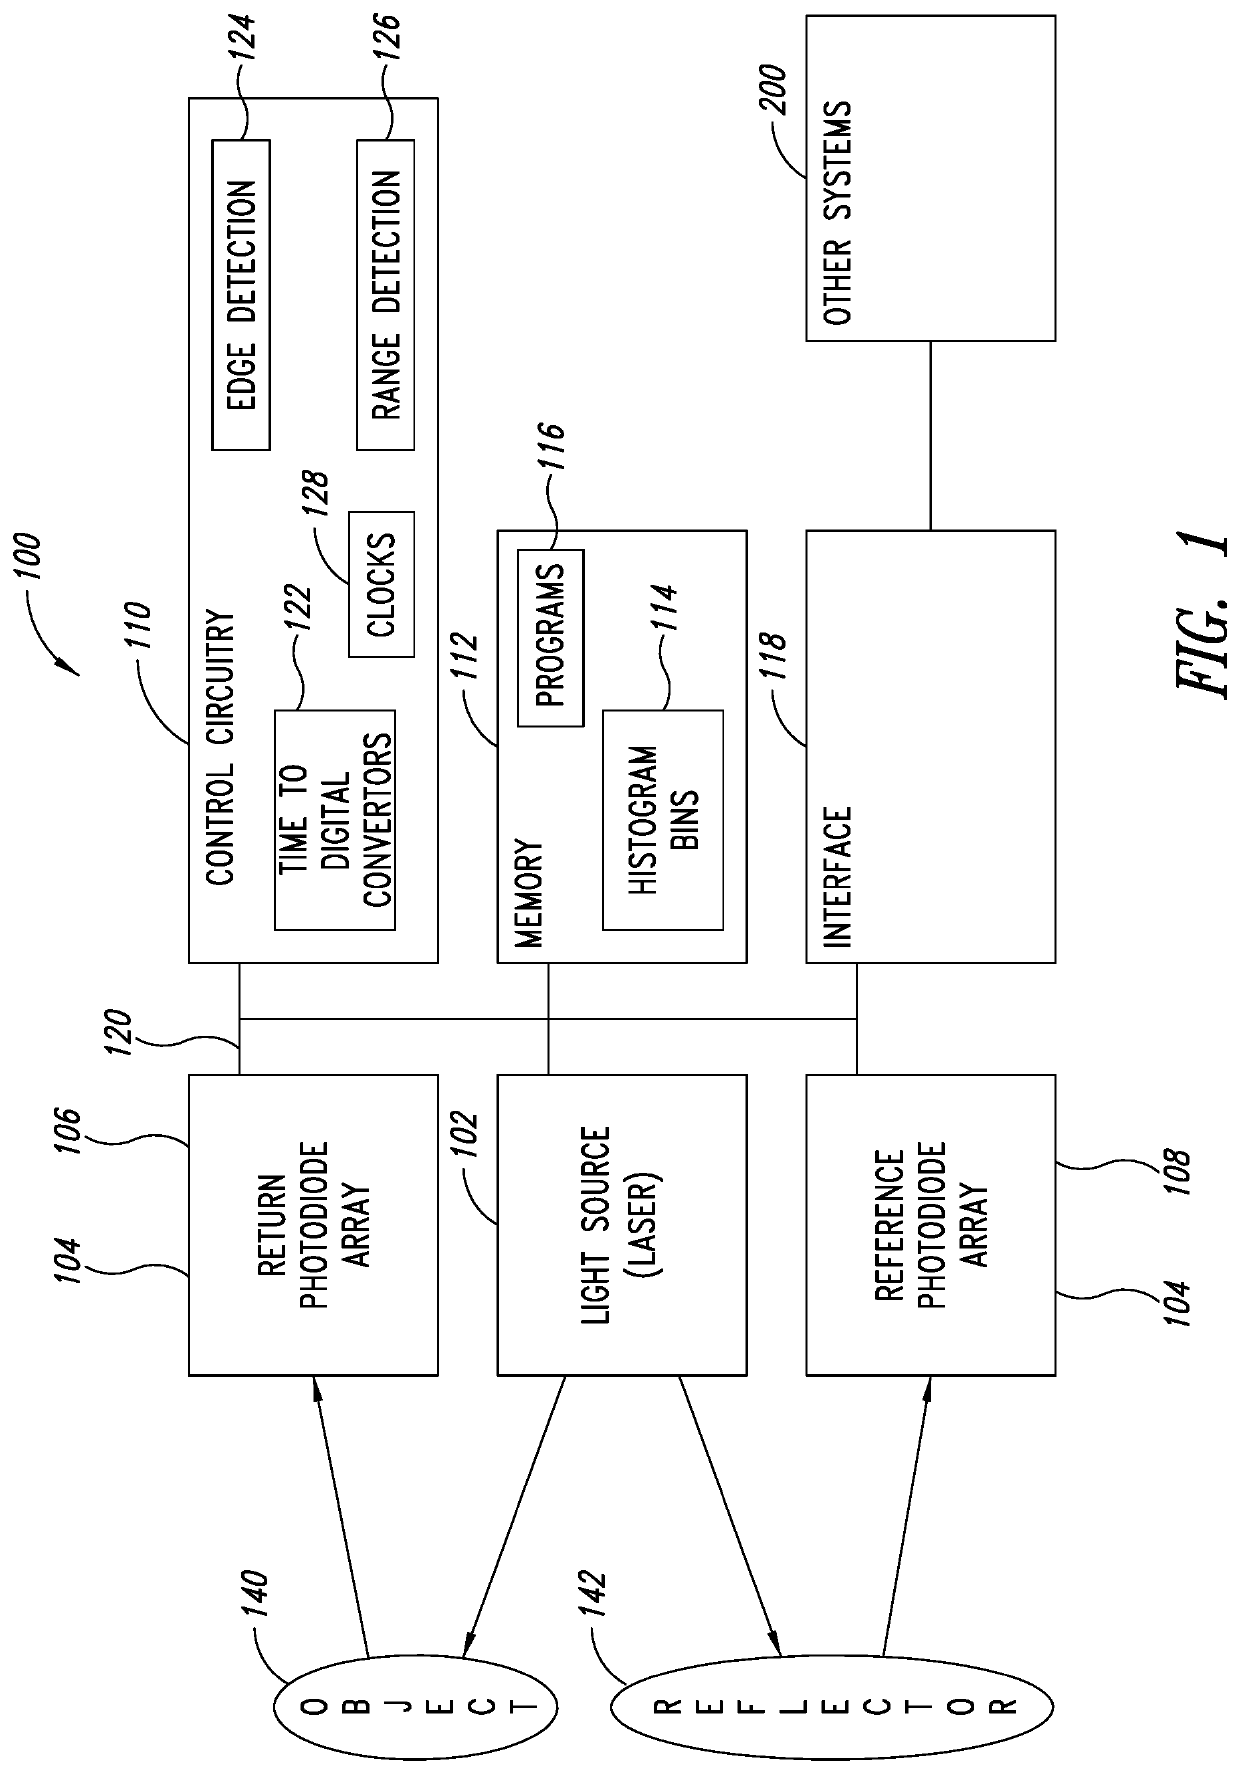 Time-of-flight imaging device, system and method